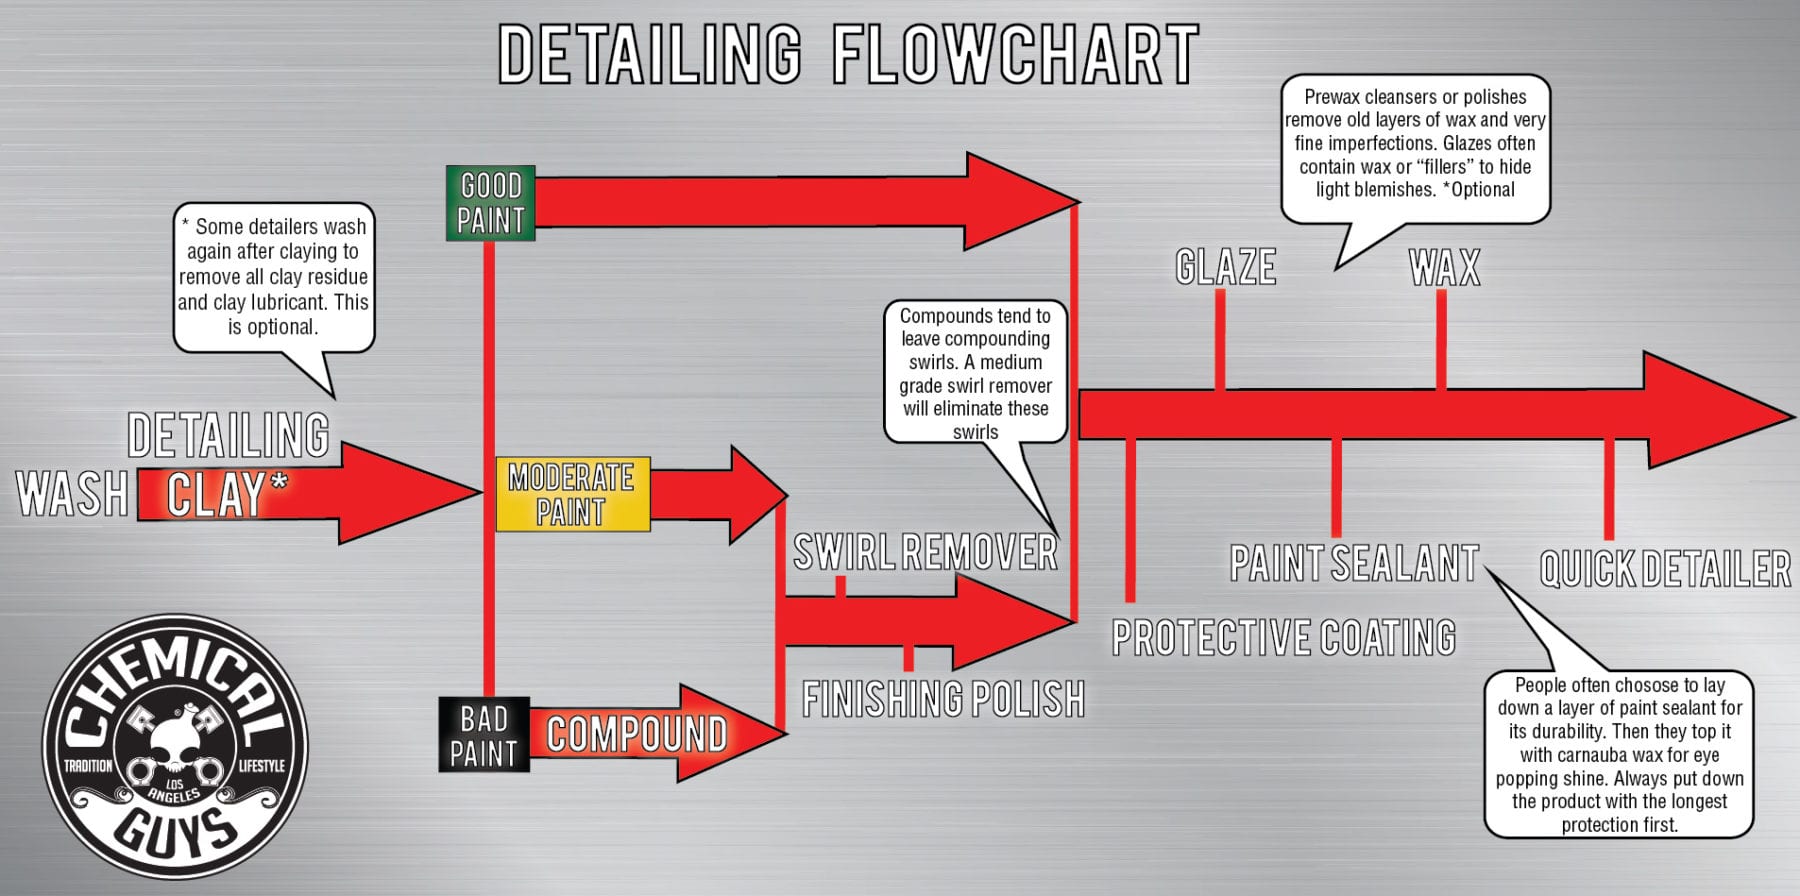 Chemical Guys Detailing Flow Chart!